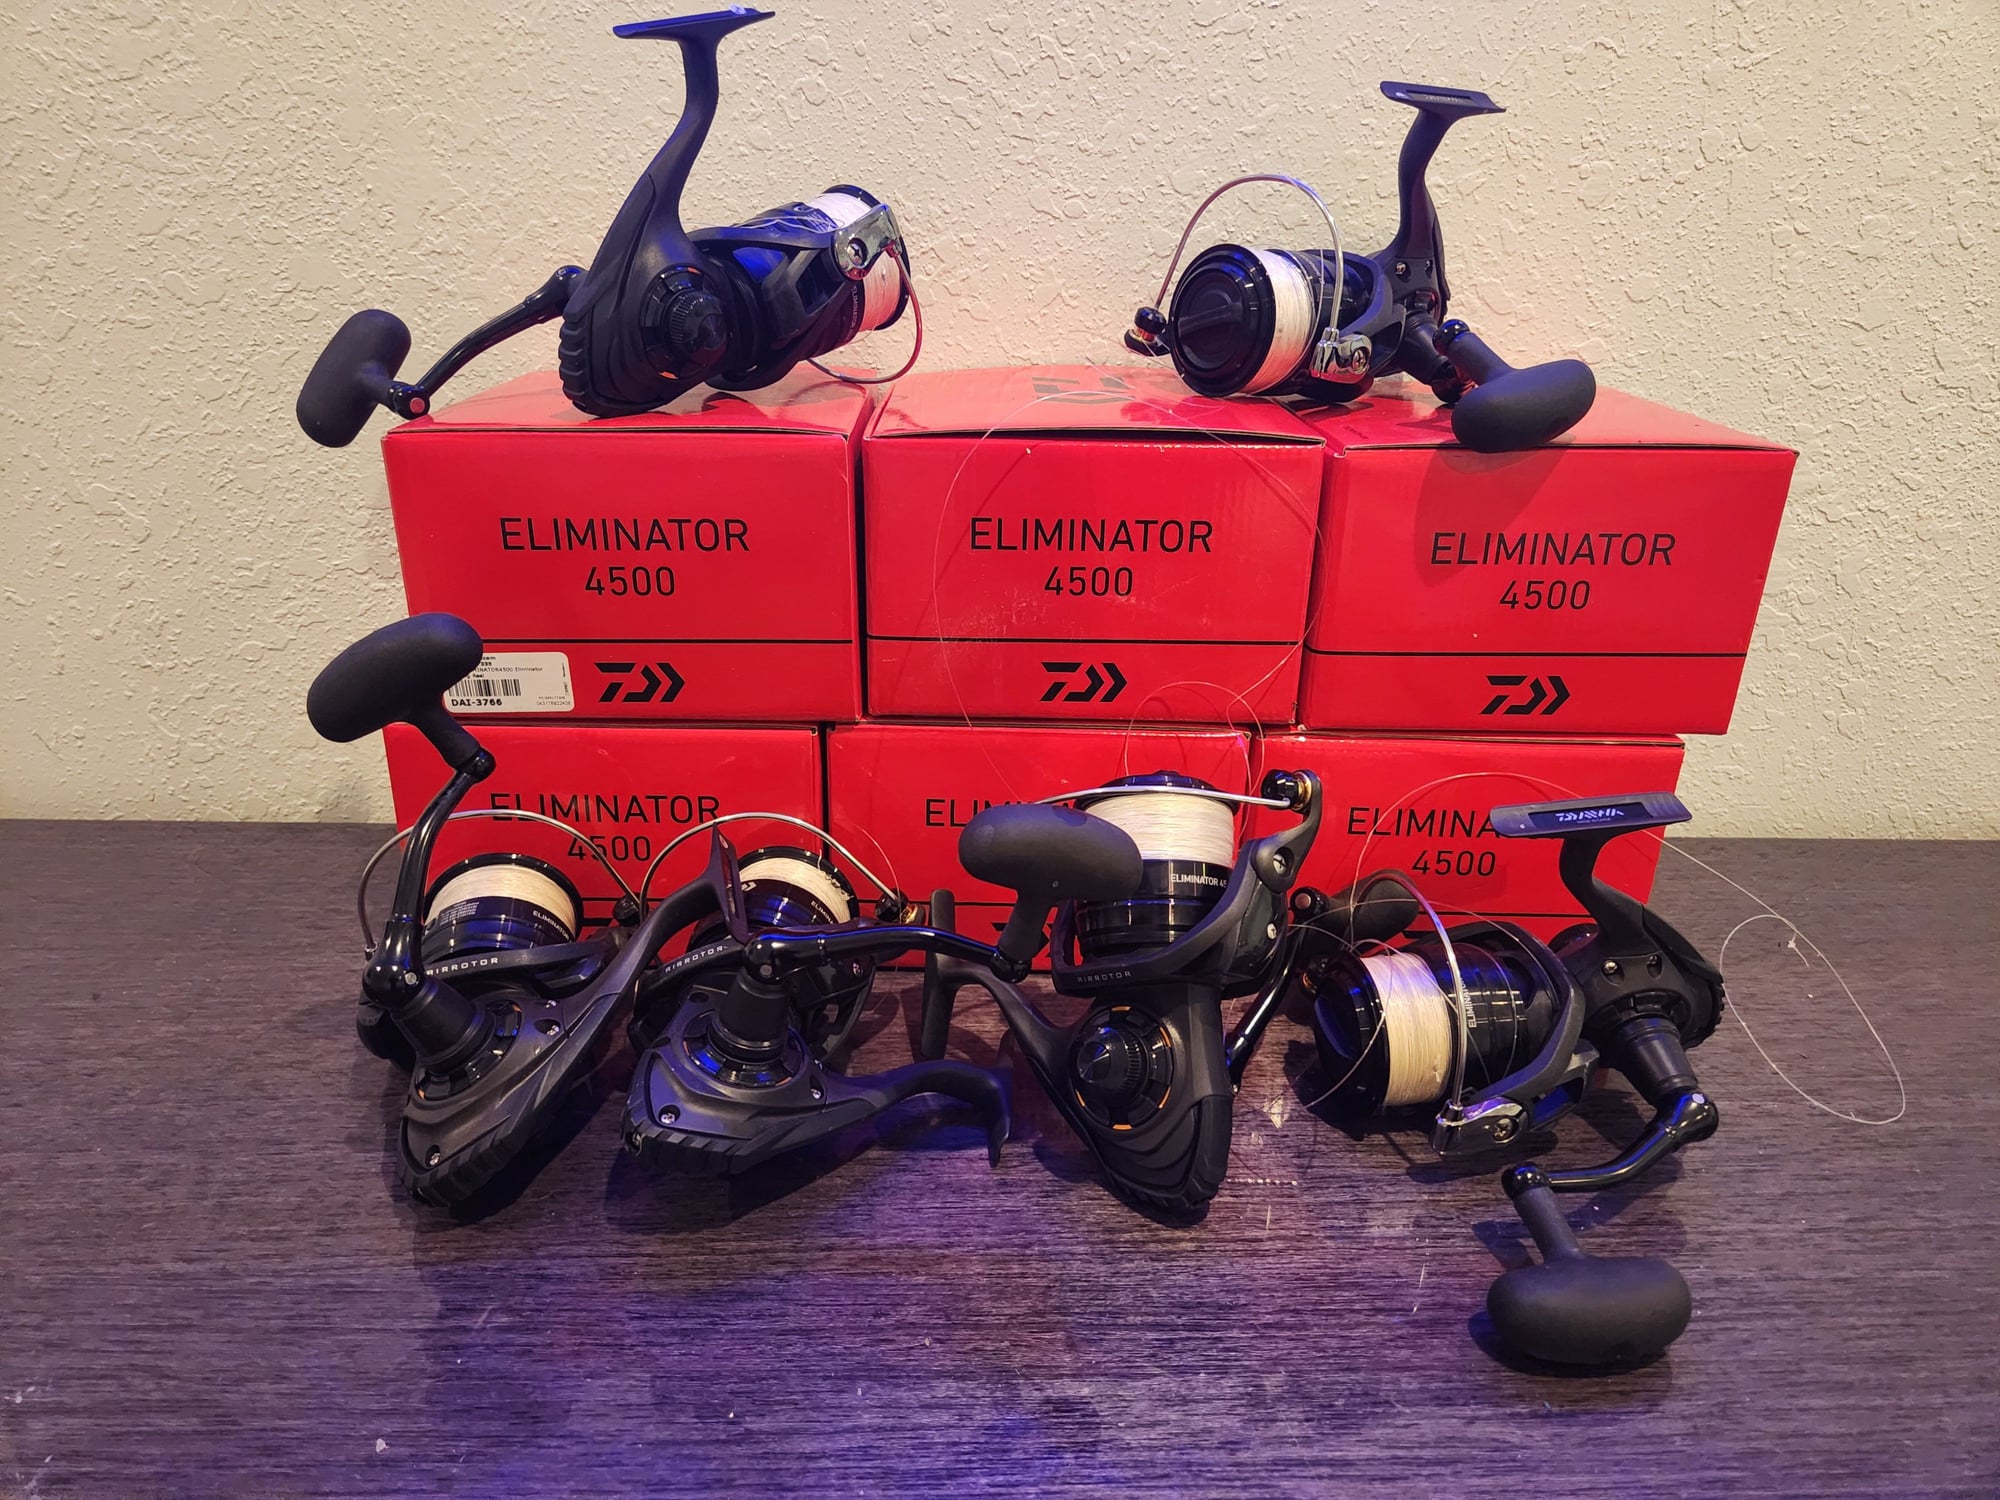 WTS 6x Daiwa Eliminator 4500 Saltwater Spinning Reels - The Hull Truth -  Boating and Fishing Forum